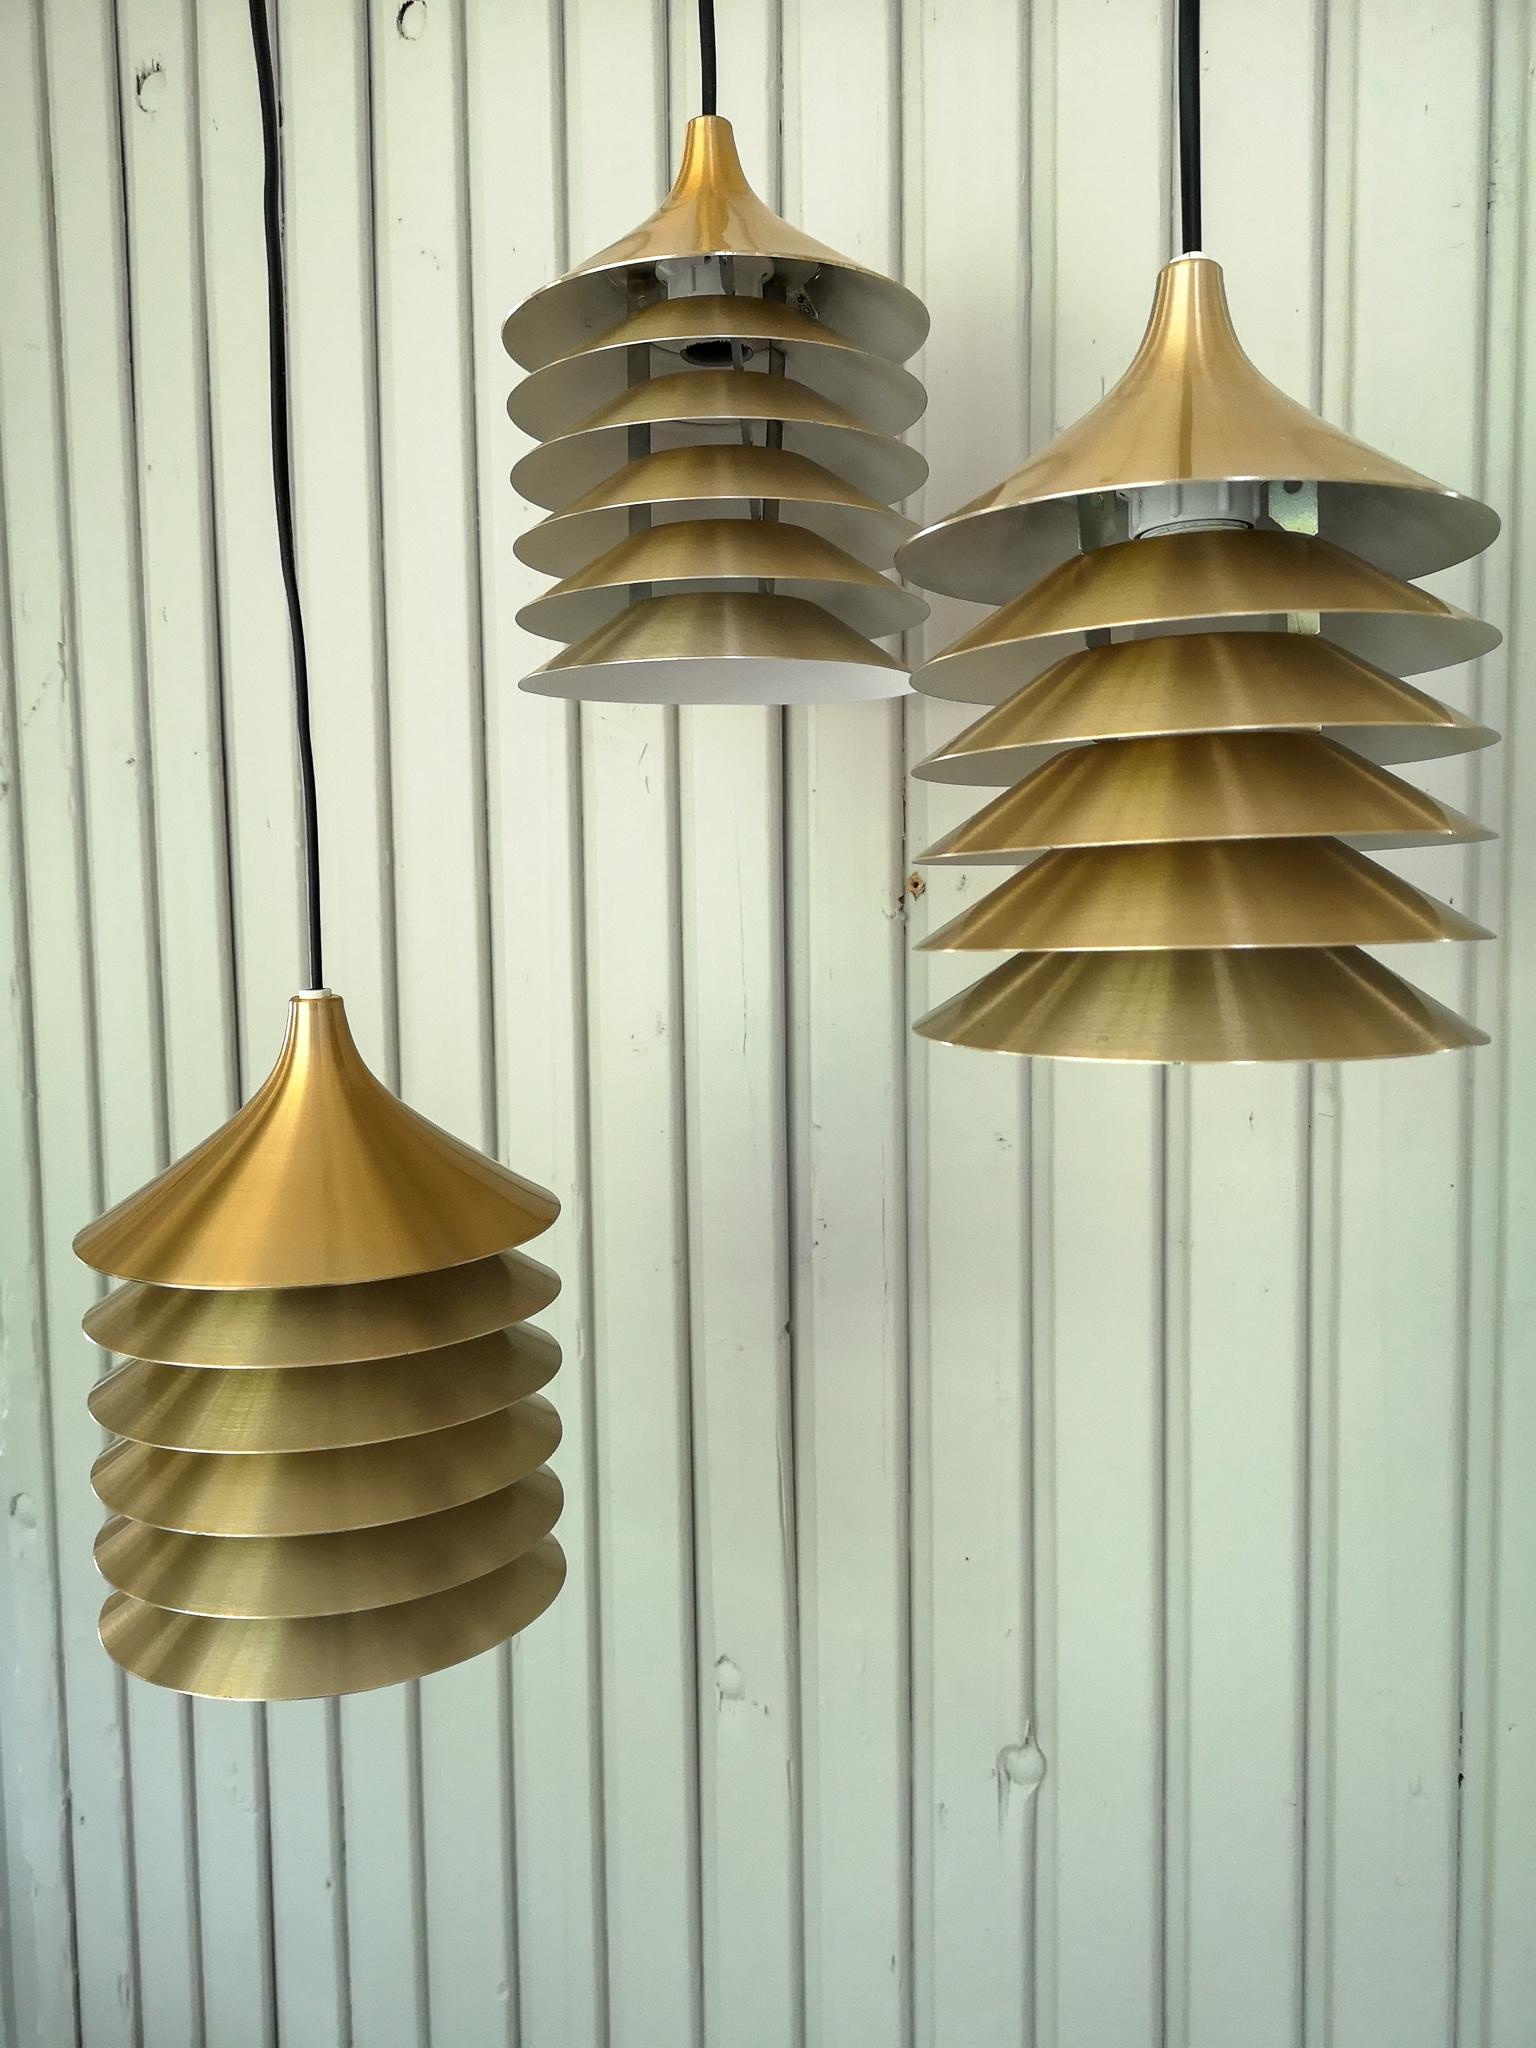 Set of three original, 1970s hanging light designed by Bent Gantzel-Boysen for Ikea, Sweden. This model of the duett collection has 6 metal/brass colored rings.
The light has a E14 socket for bulbs, it’s been rewired. These three brass colored is